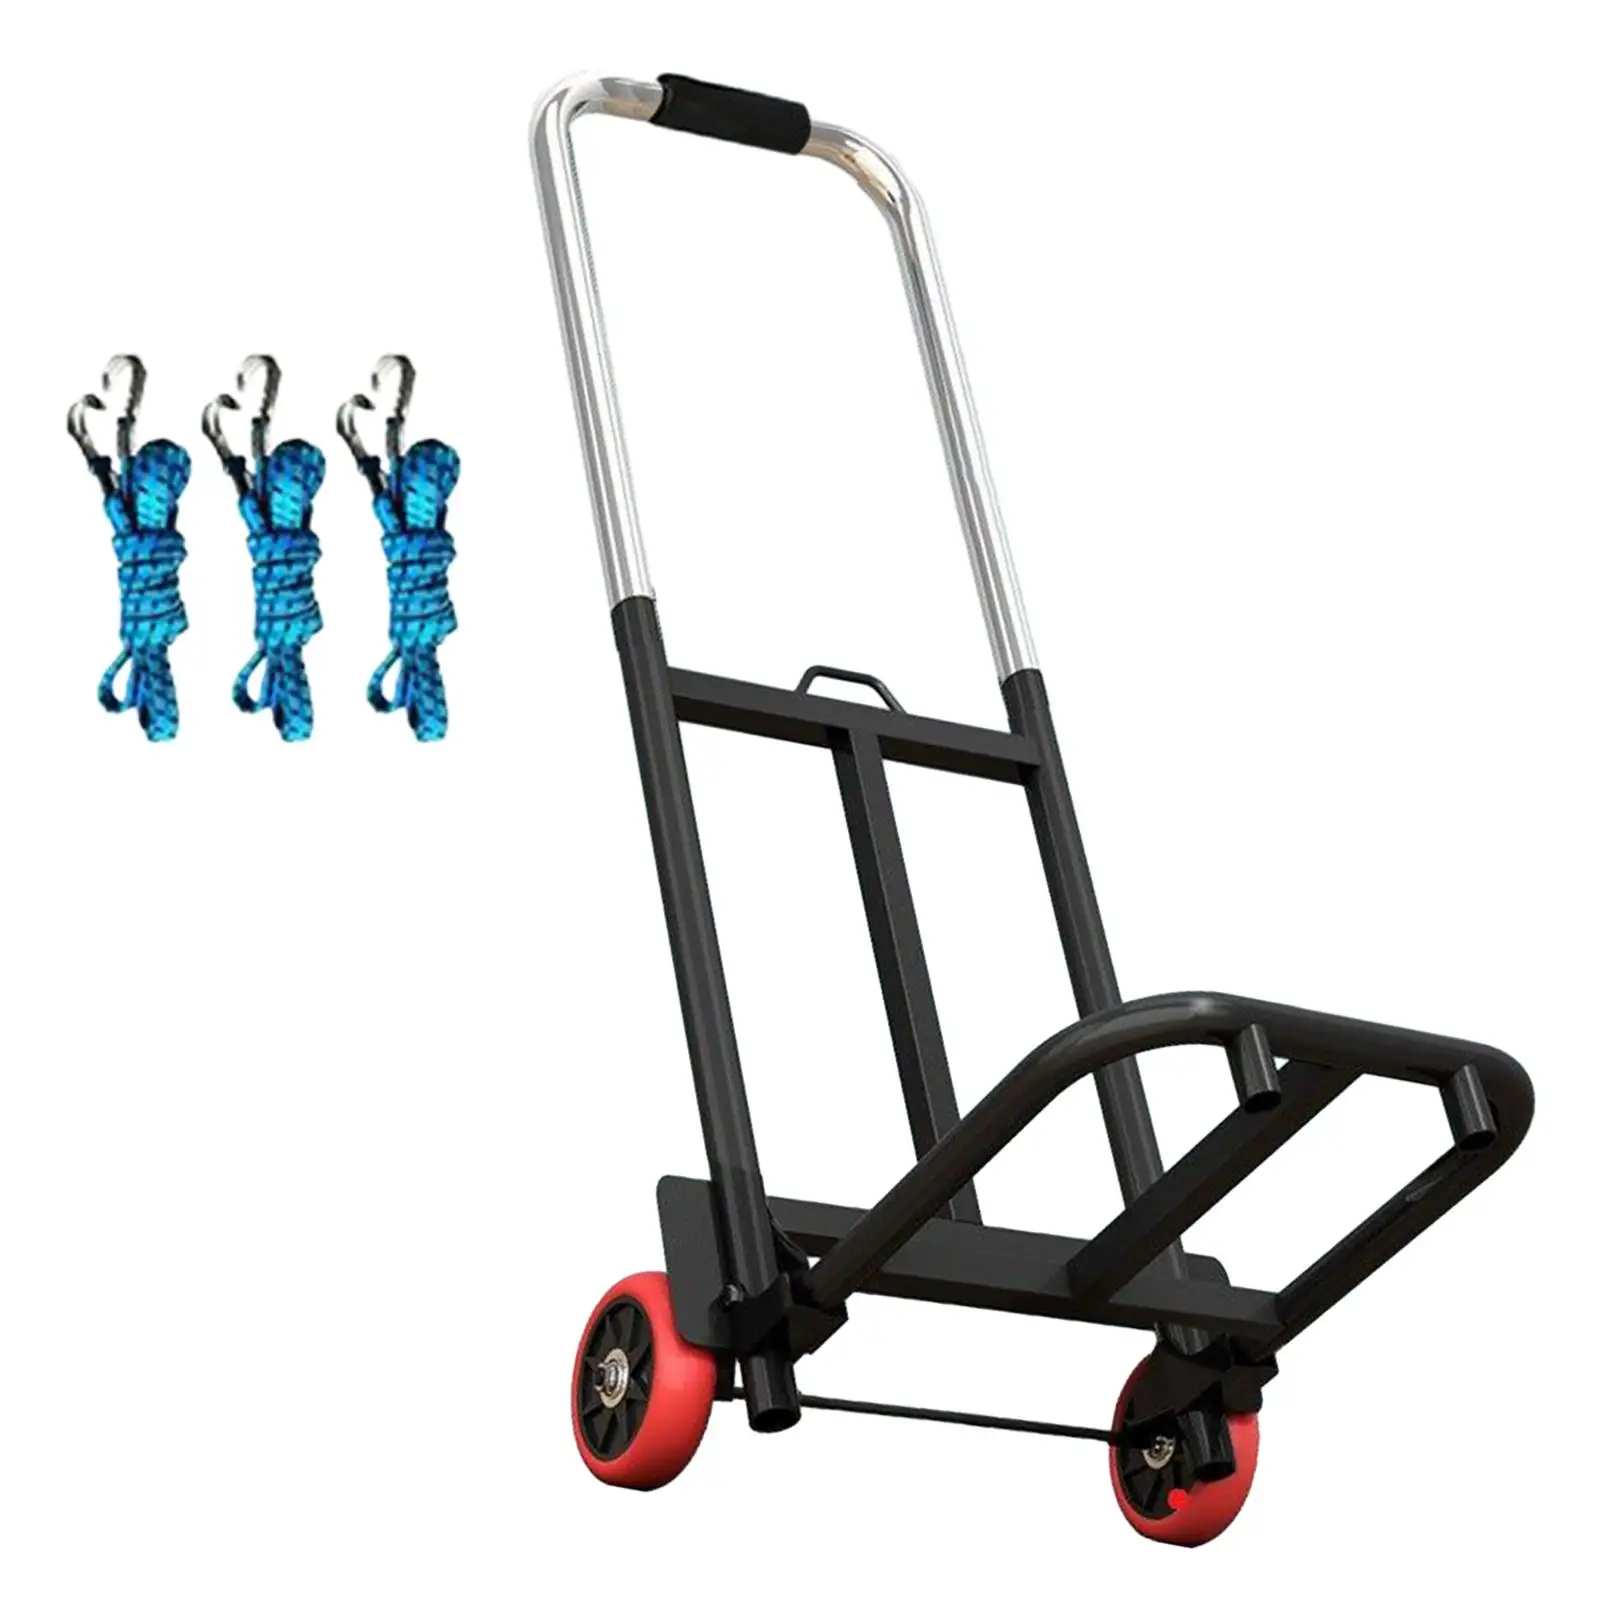 Folding Hand Truck Luggage Trolley Cart Sturdy Telescoping Handle for Office